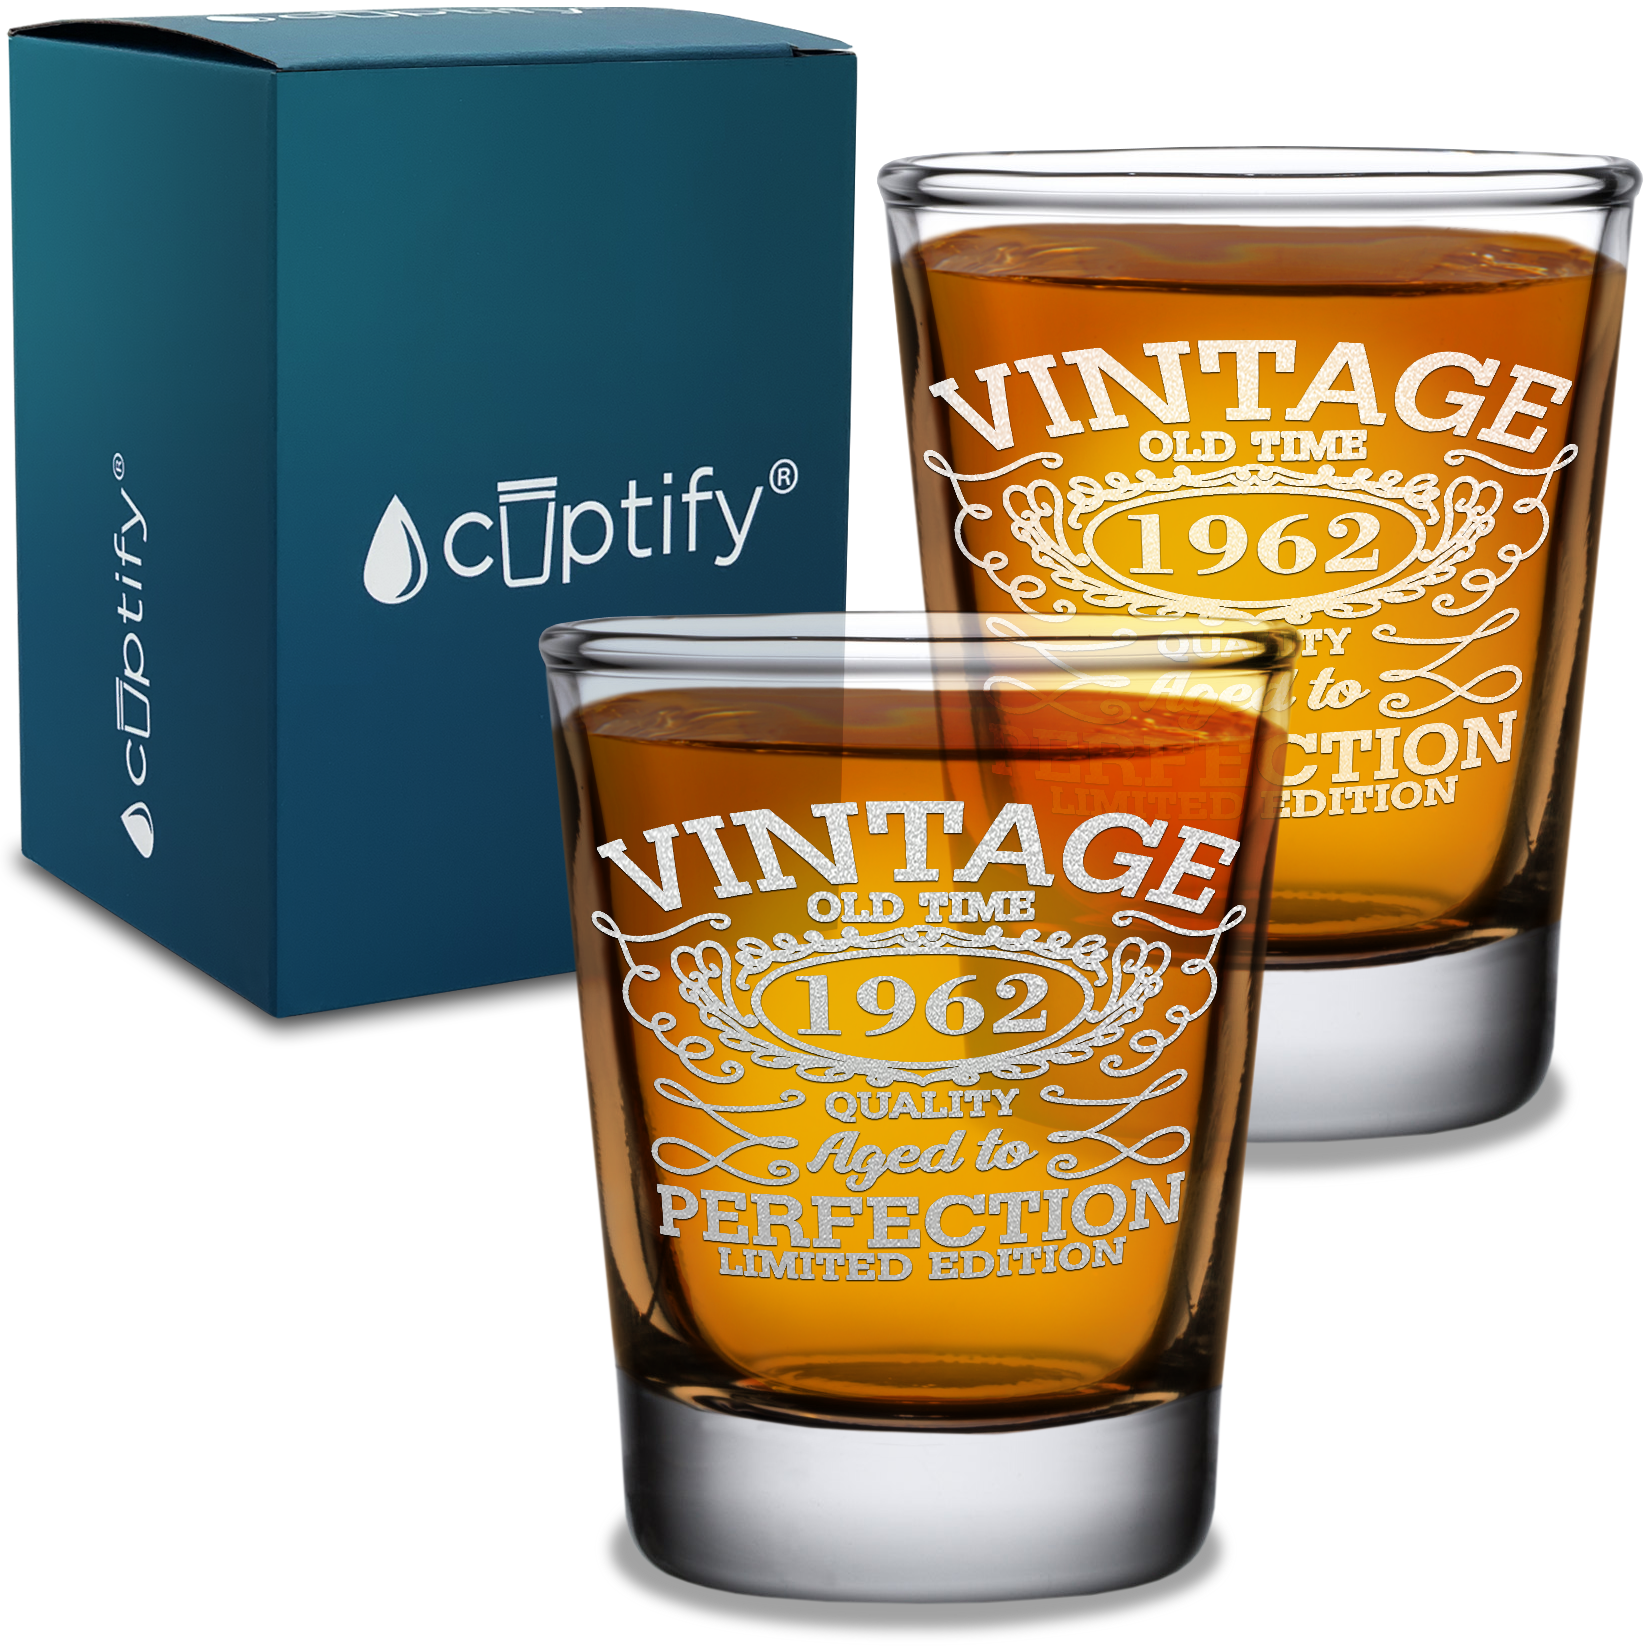 59th Birthday Vintage 59 Years Old Time 1962 Quality Laser Engraved 2oz Shot Glasses - Set of 2